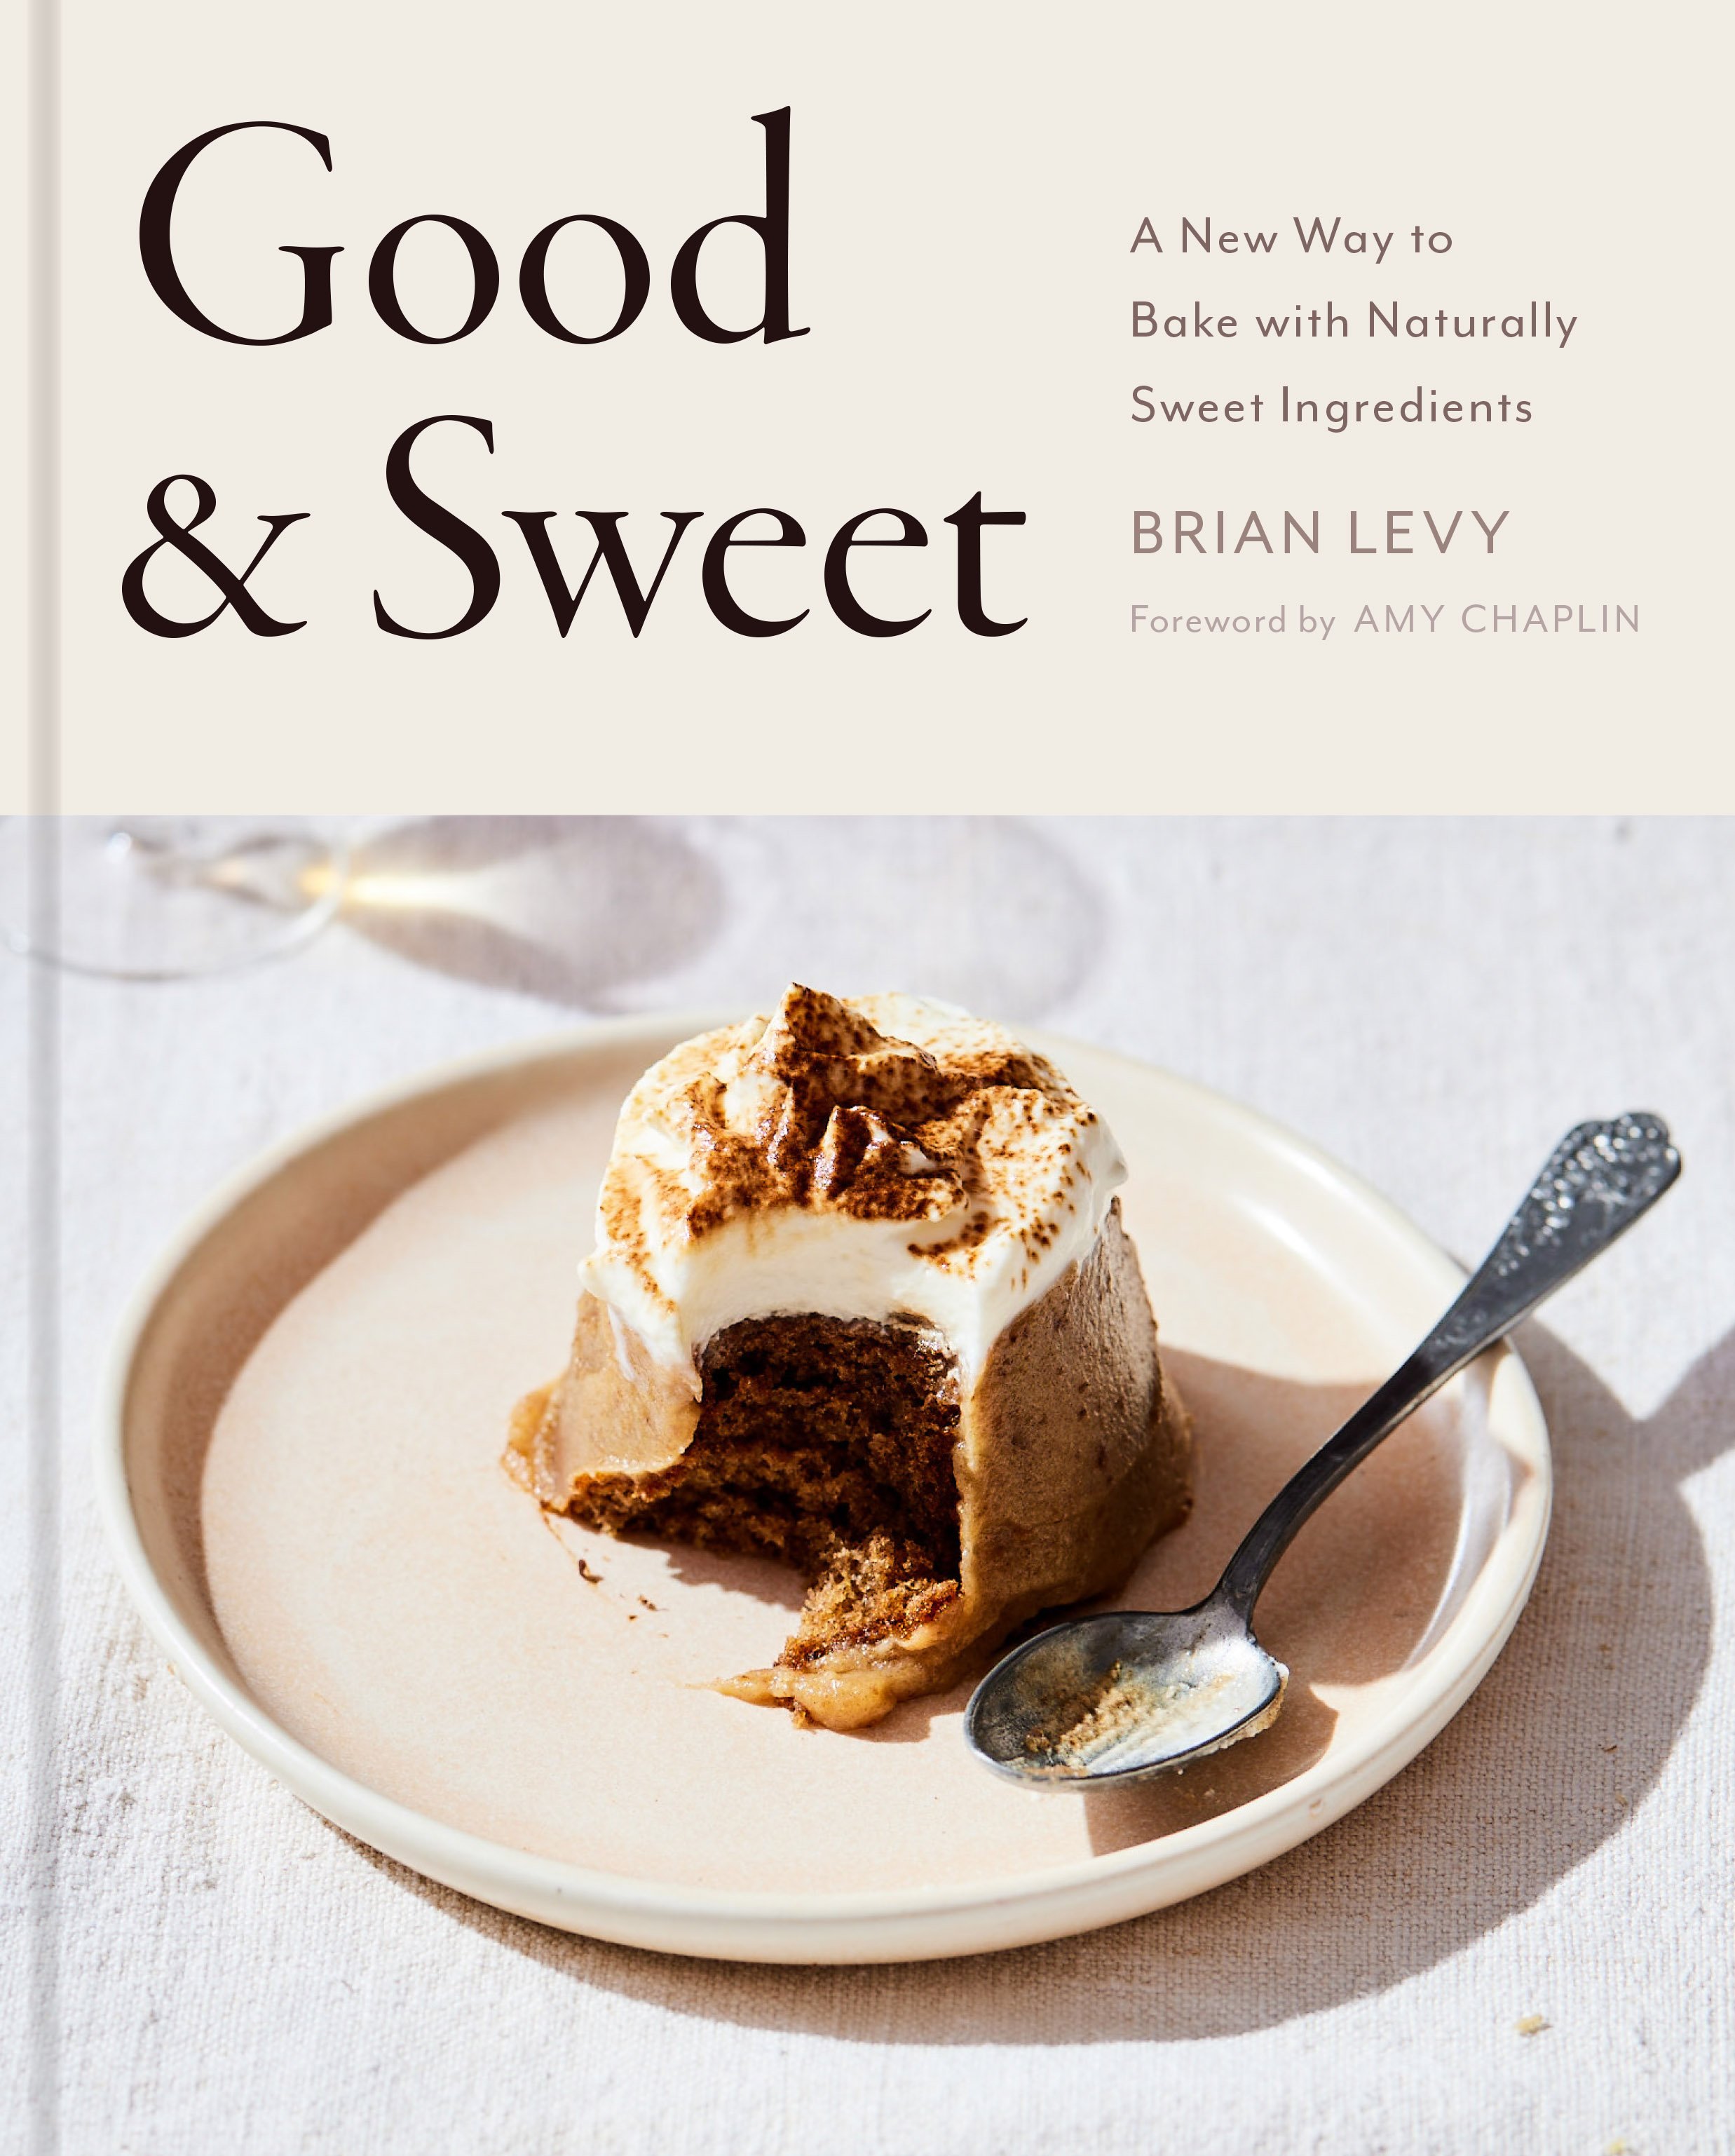 Brian Levy - cookbook author and pastry cook